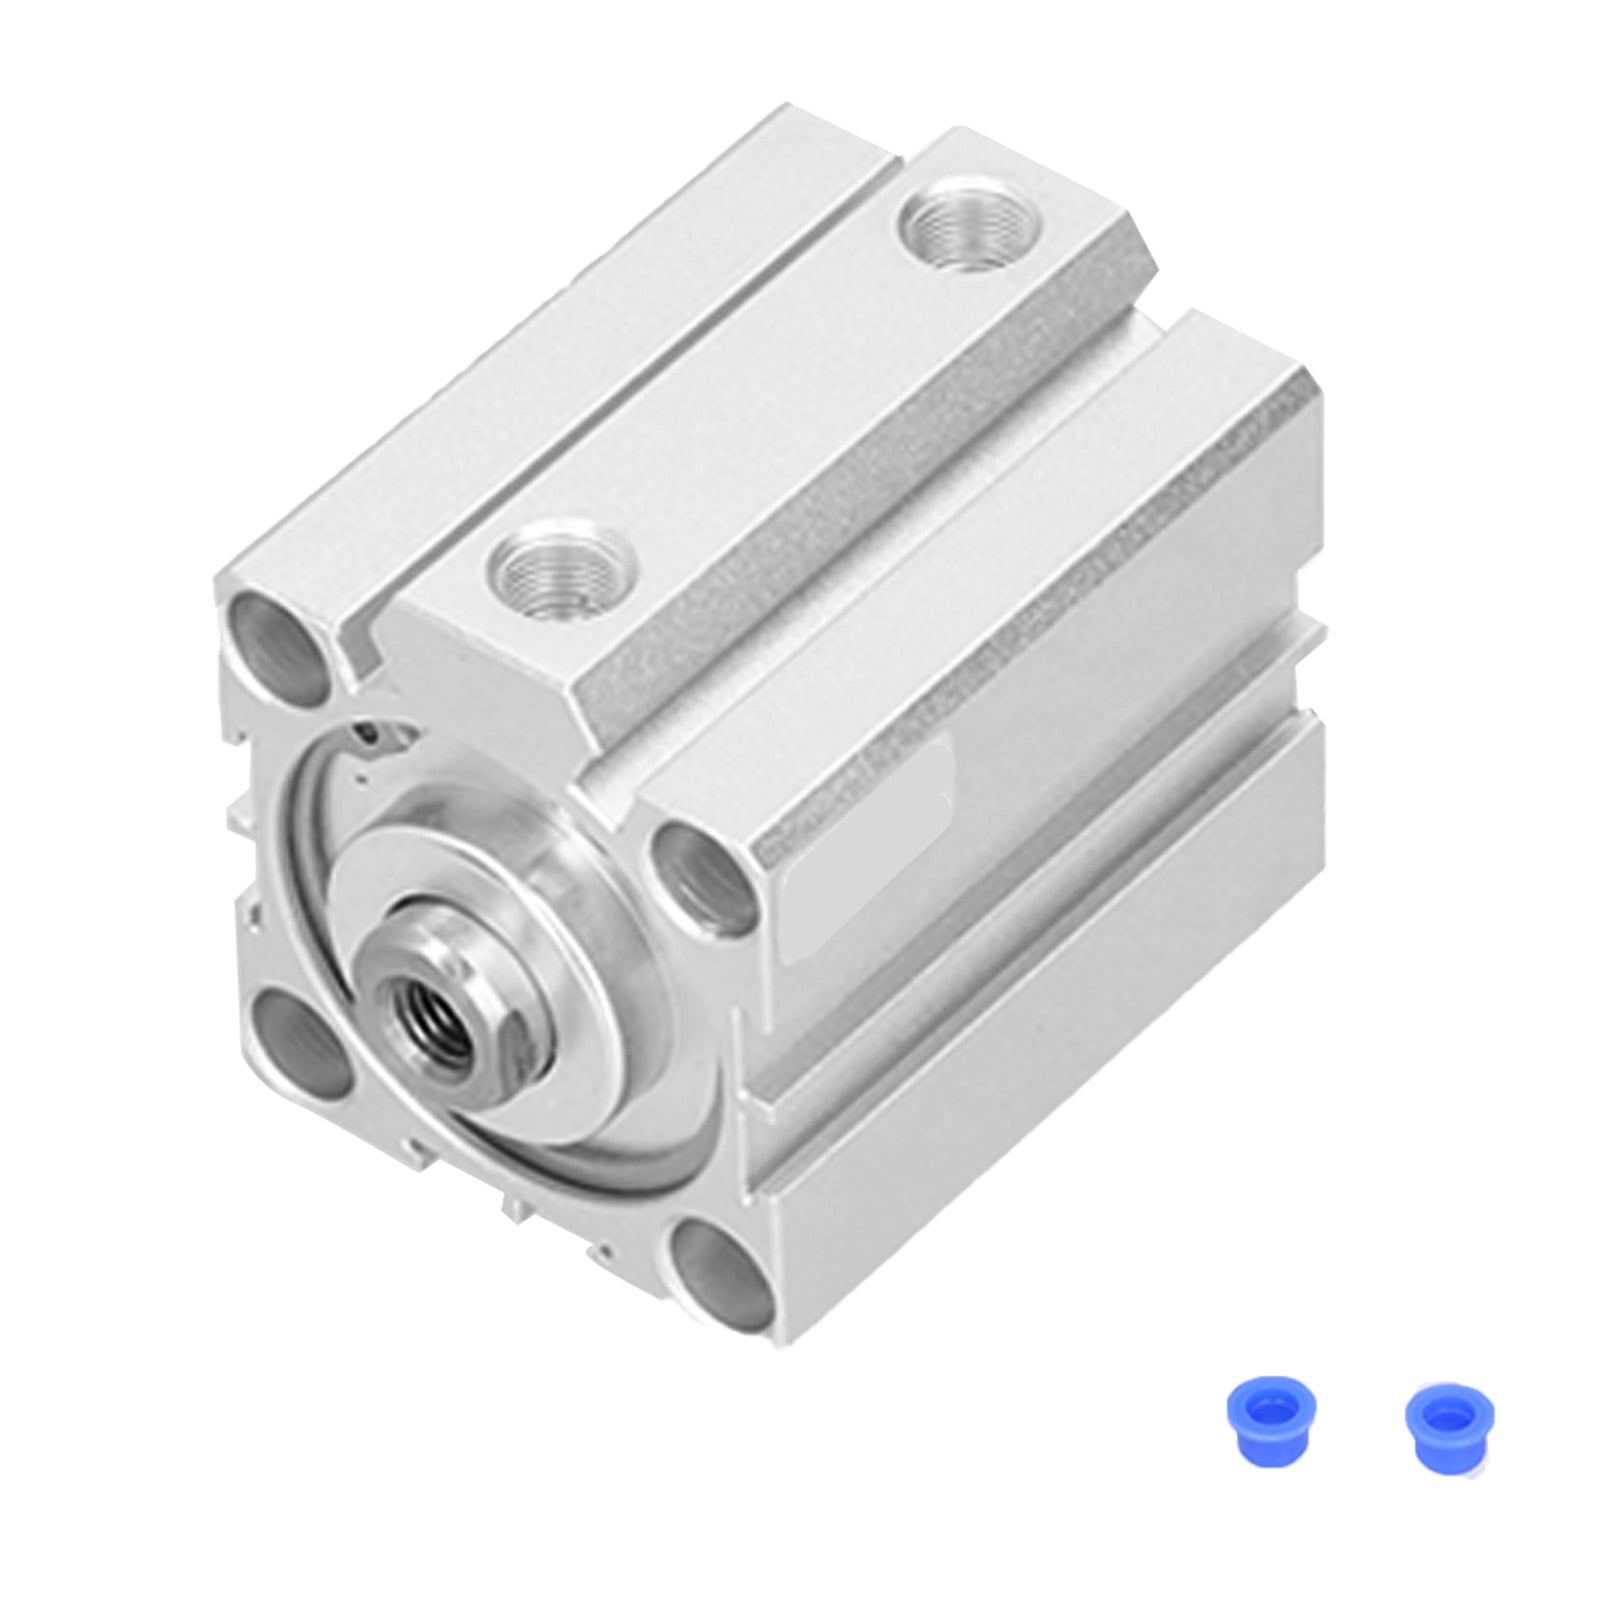 Safely Firm Sturdy Pneumatic Air Cylinder Pneumatic Standard Cylinder Compact Durable Tough for Guiding Lubrication 